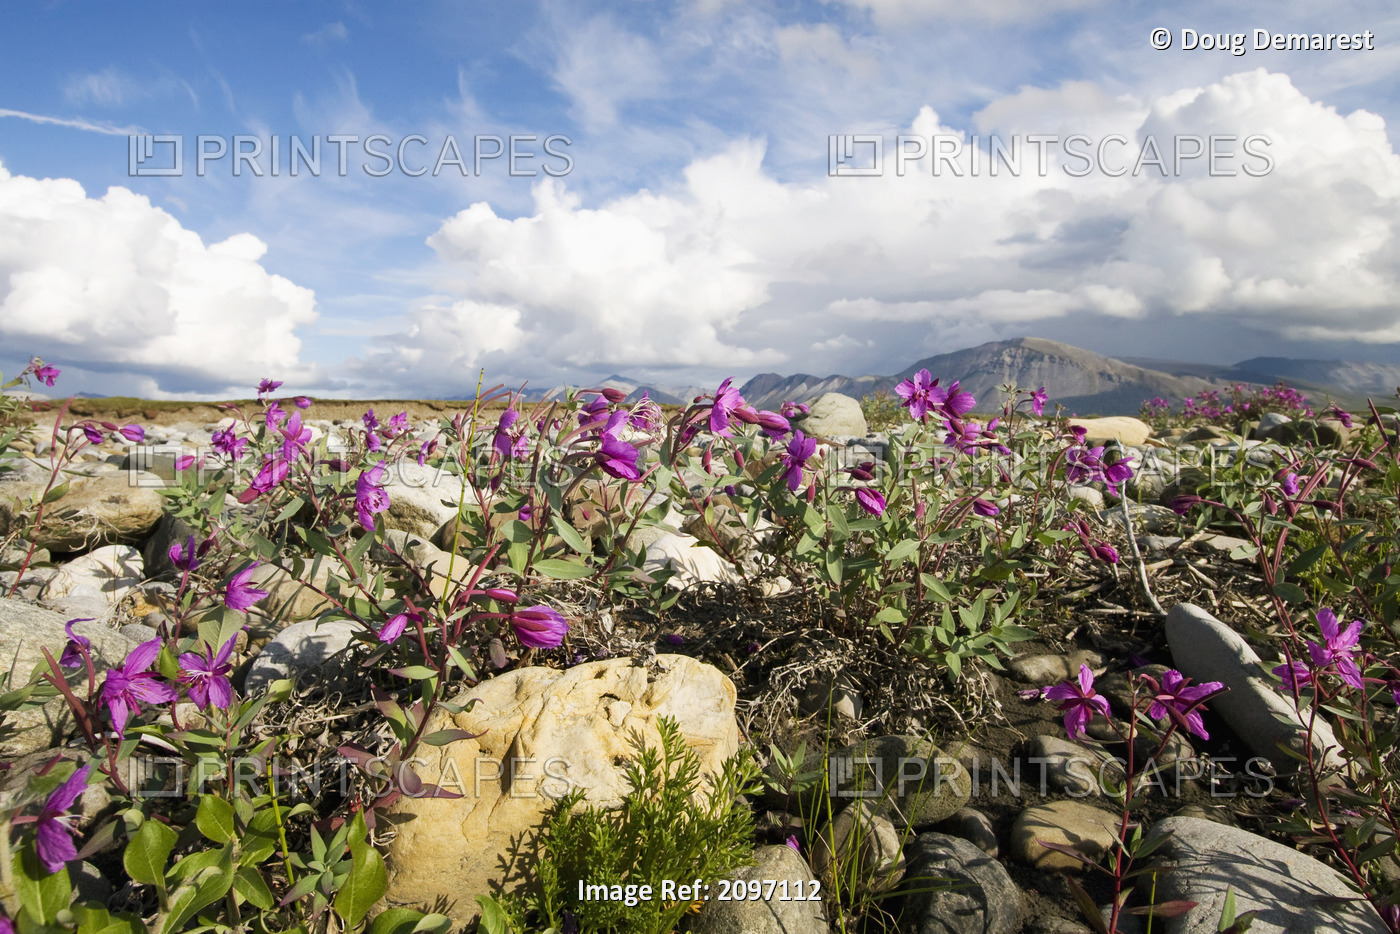 Dwarf Fireweed Bloom Along The Canning River In Anwr. Summer In Arctic Alaska.